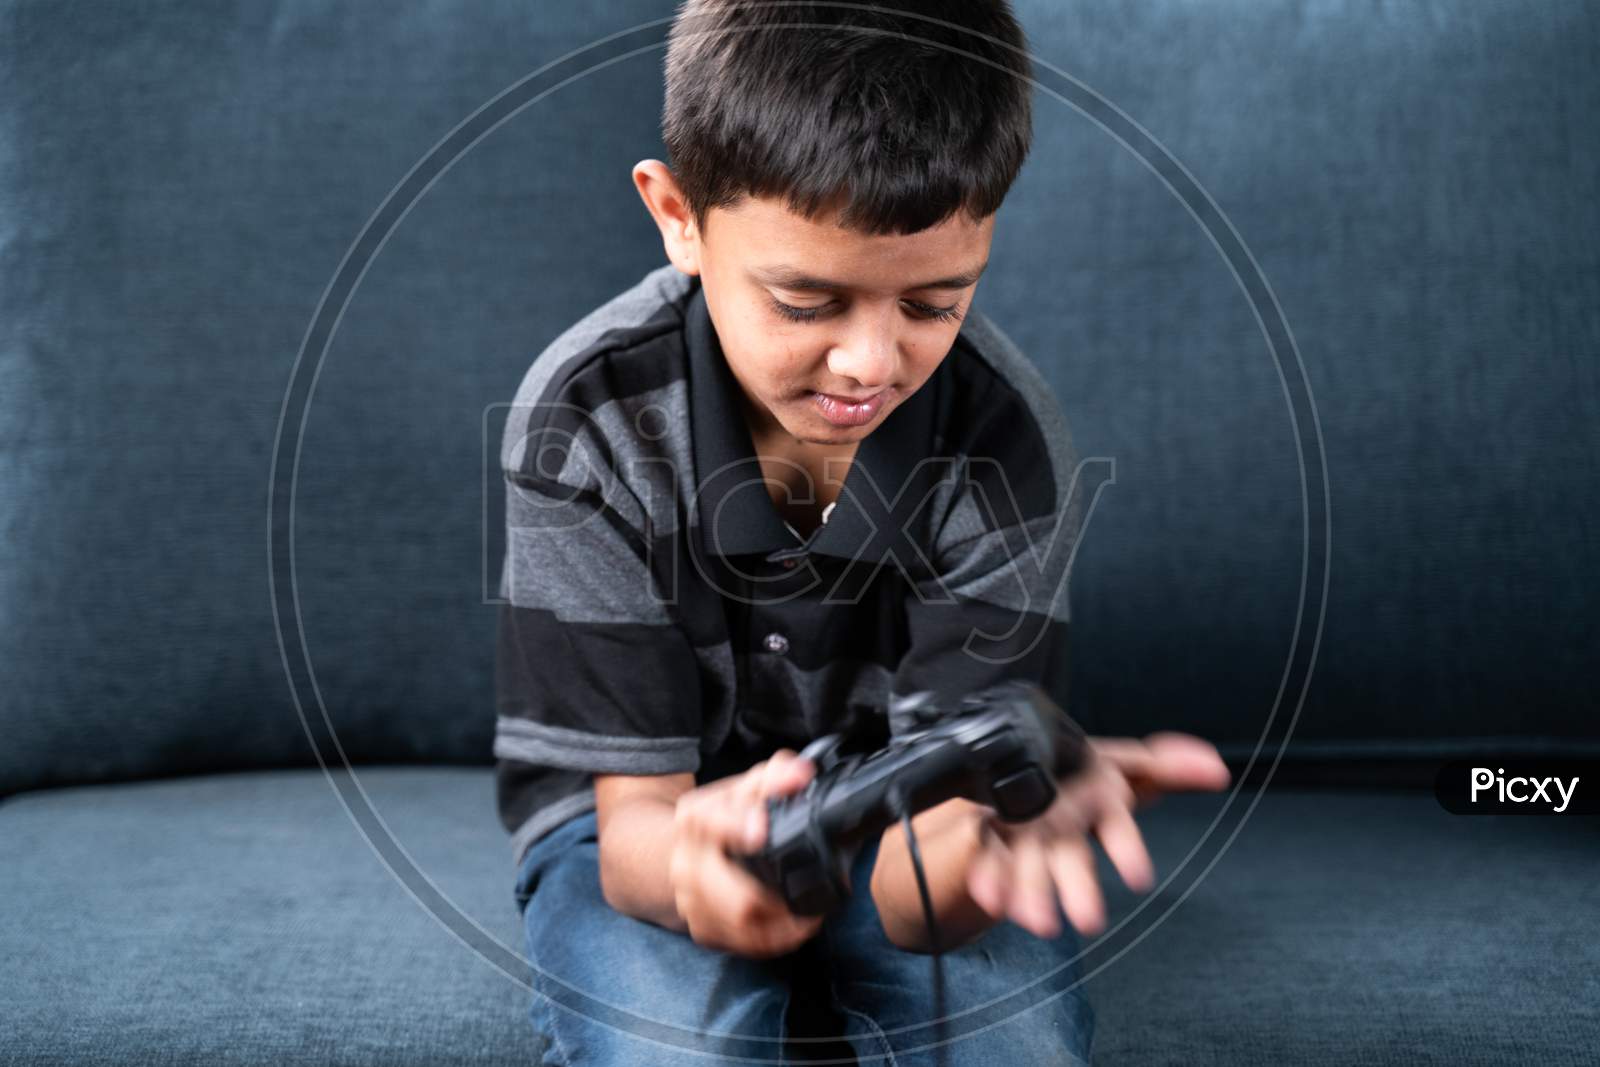 Selective Focus On Kid, Kid Hitting The Gamepad Or Joystick Due To Not Working Properly While Playing Videogame At Home On Sofa.